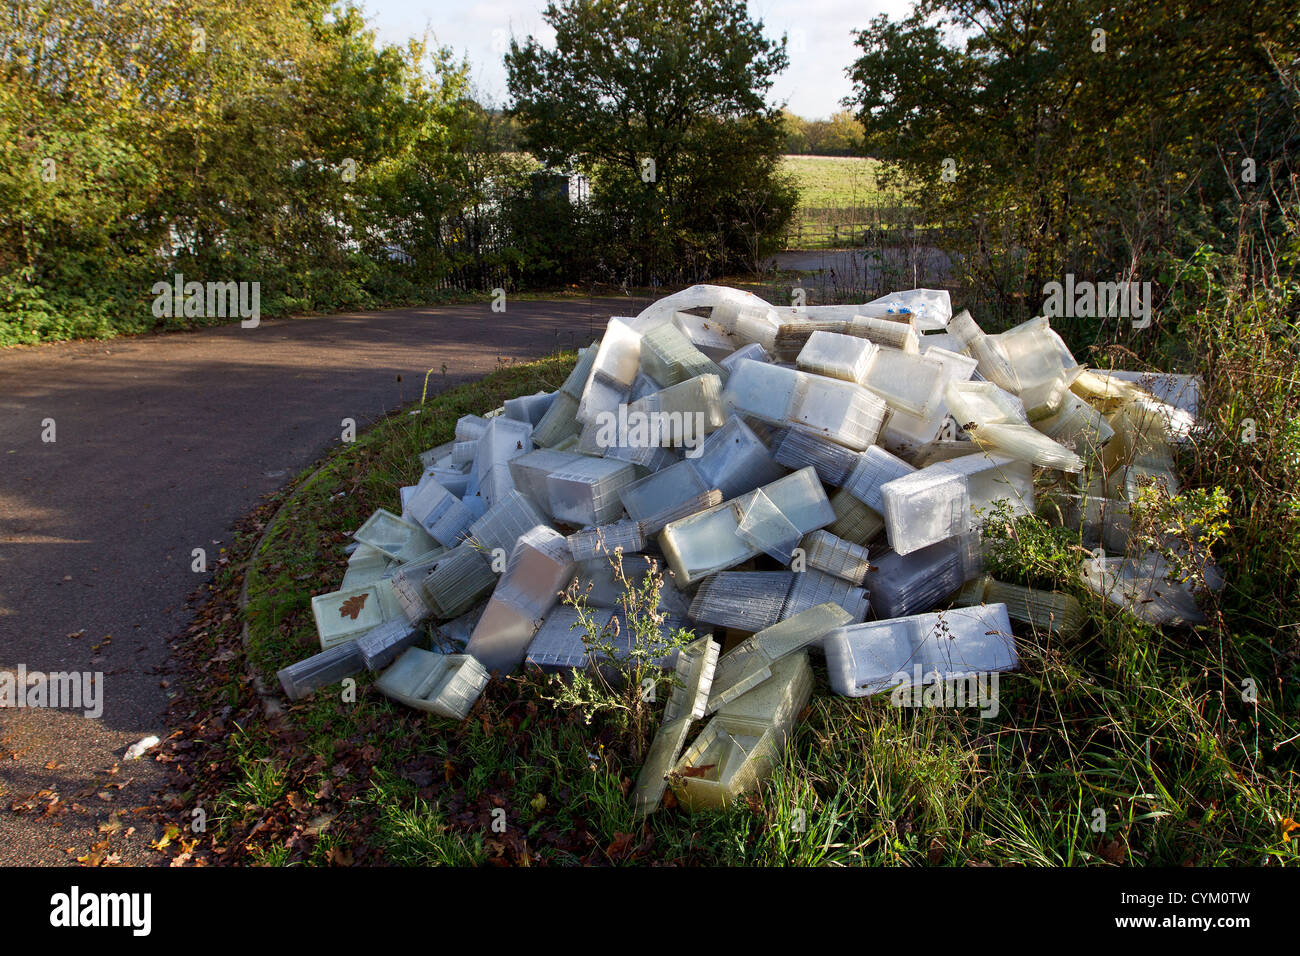 Plastic containers fly tipped in a country lane in the UK Stock Photo